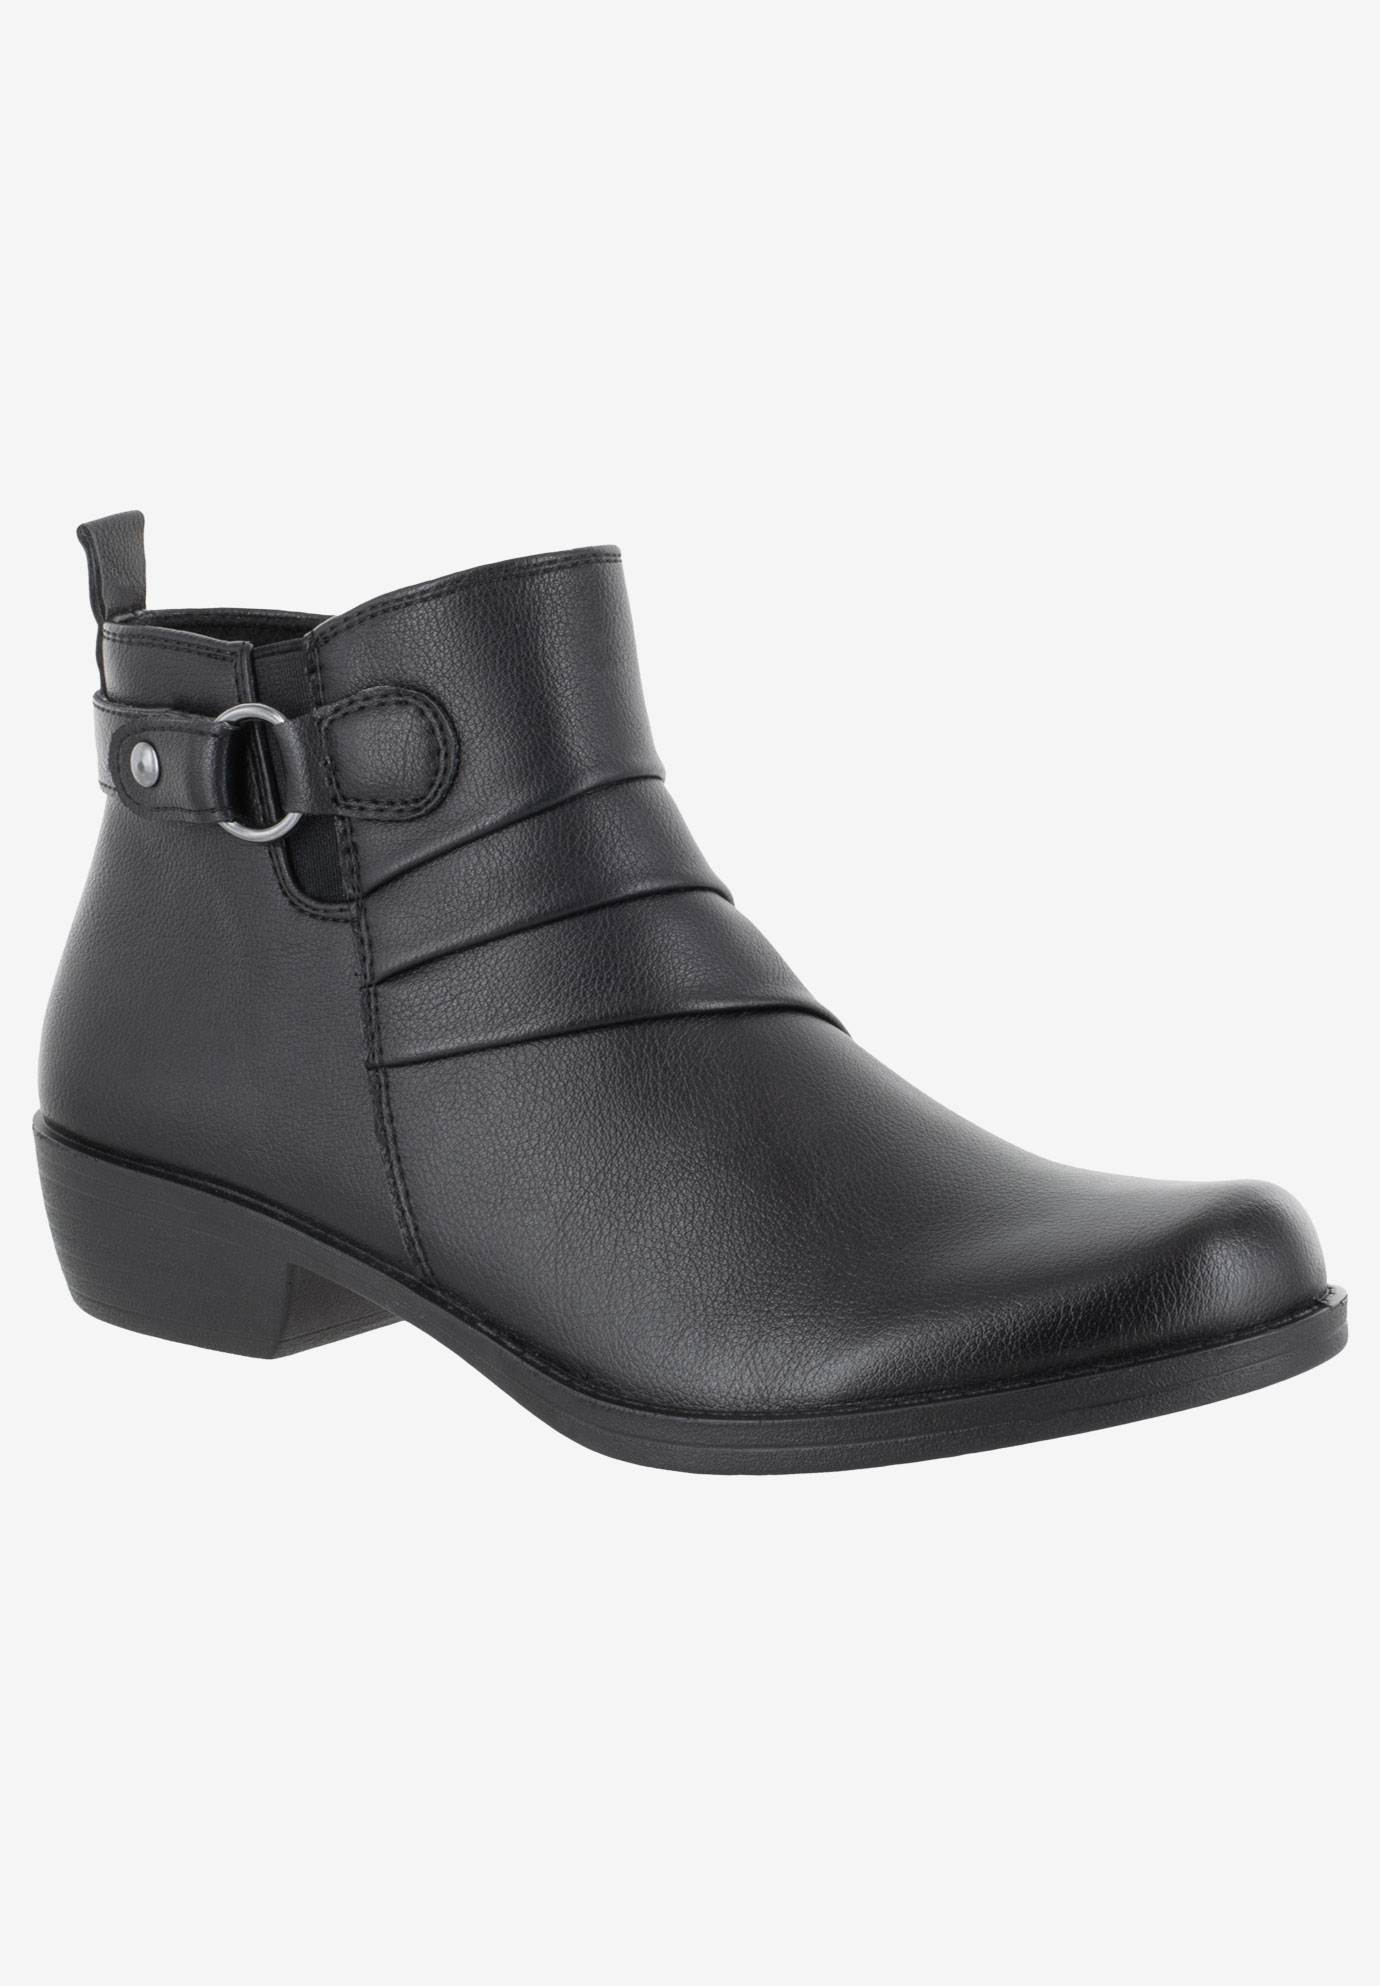 Shanna Bootie by Easy Street| Plus Size Ankle Boots & Booties | Fullbeauty